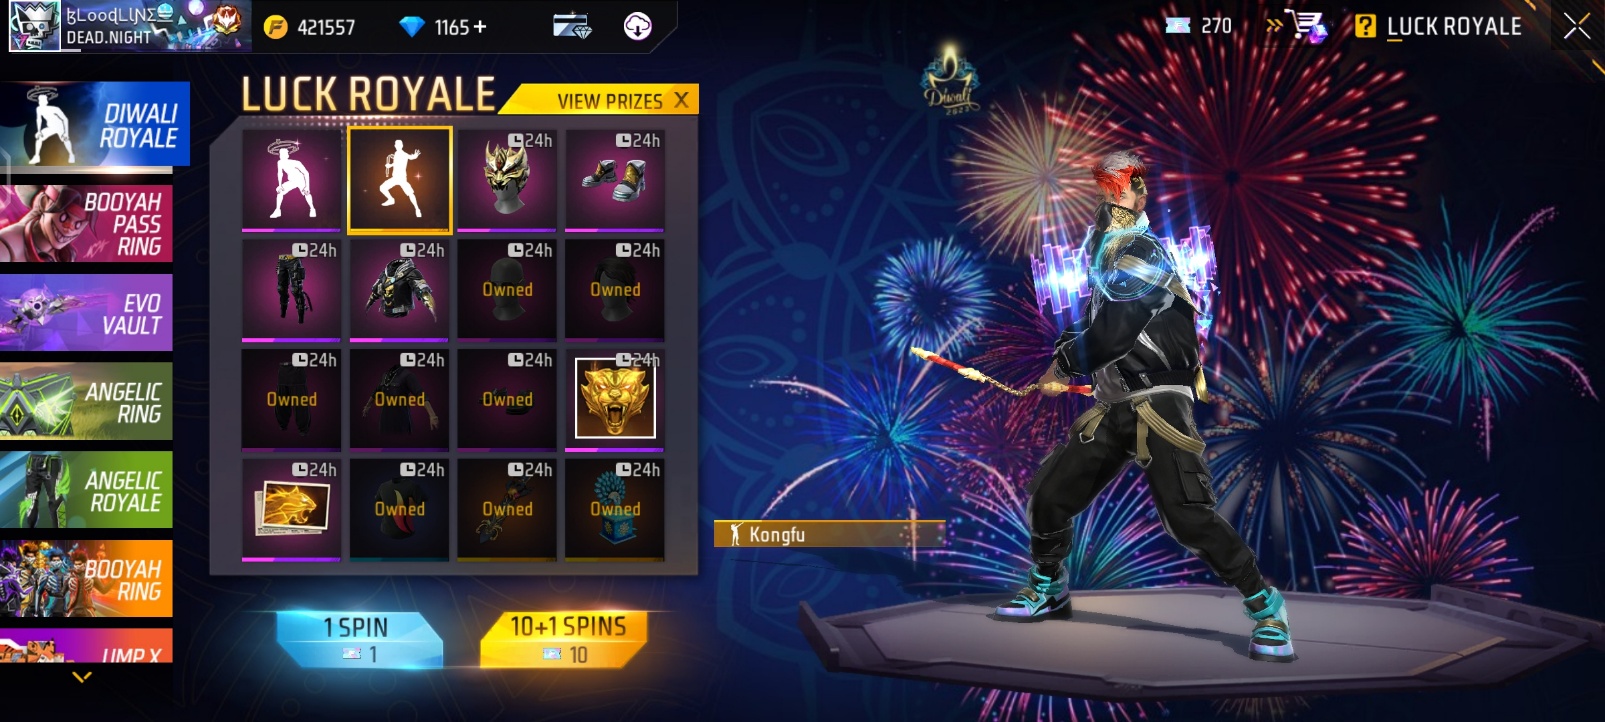 Diwali Royale 2 : Get Two Free Emotes In Free Fire Max This Diwali